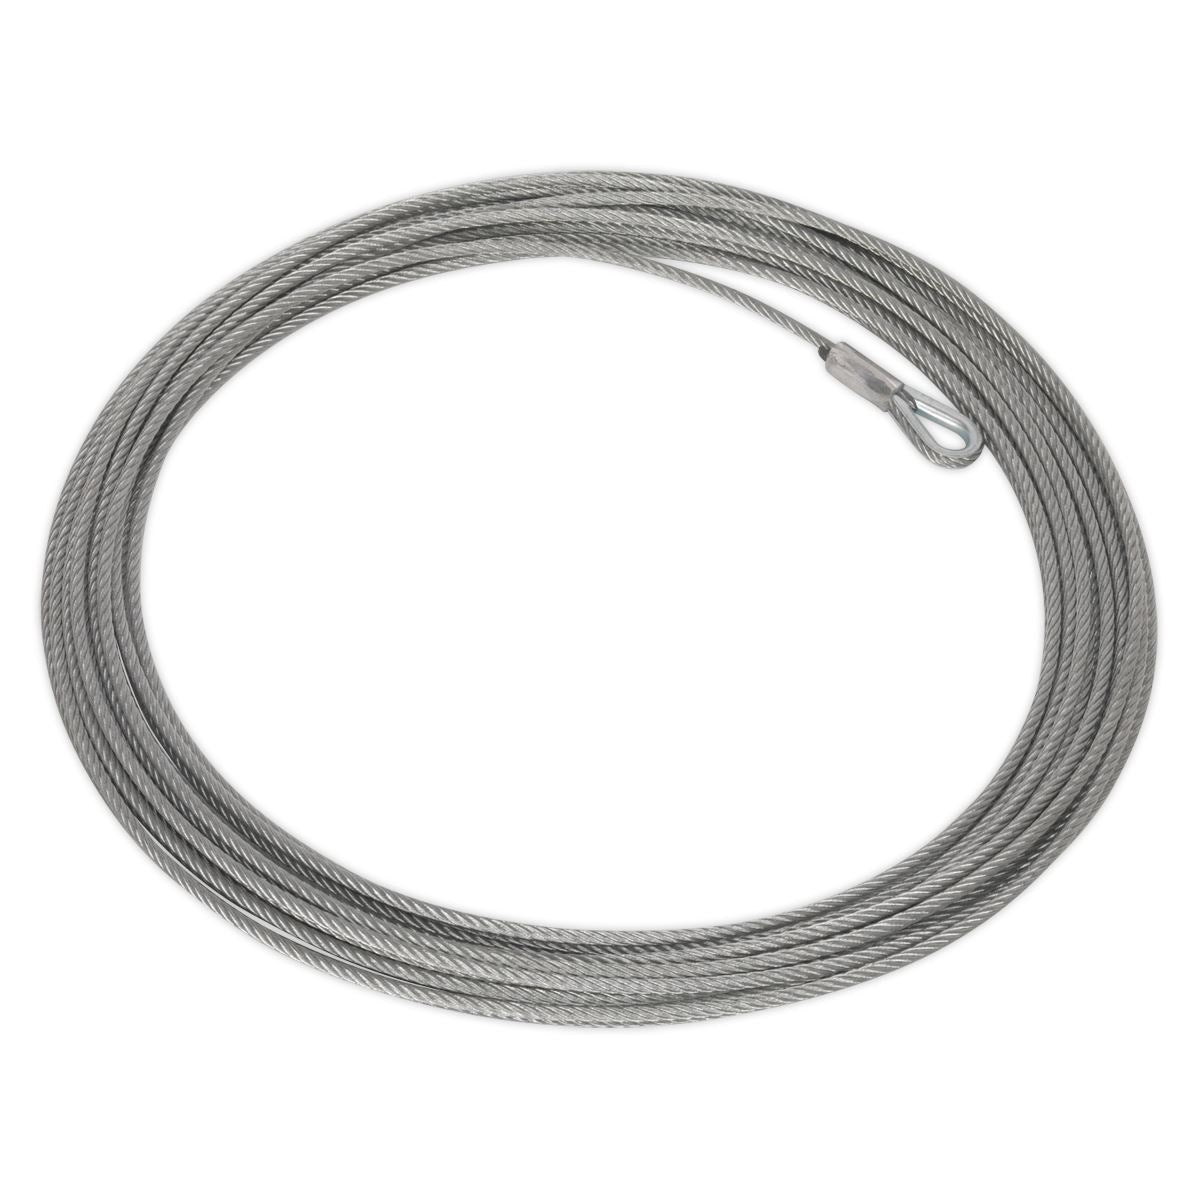 Sealey Wire Rope (Ø4.8mm x 15.2m) for ATV1135